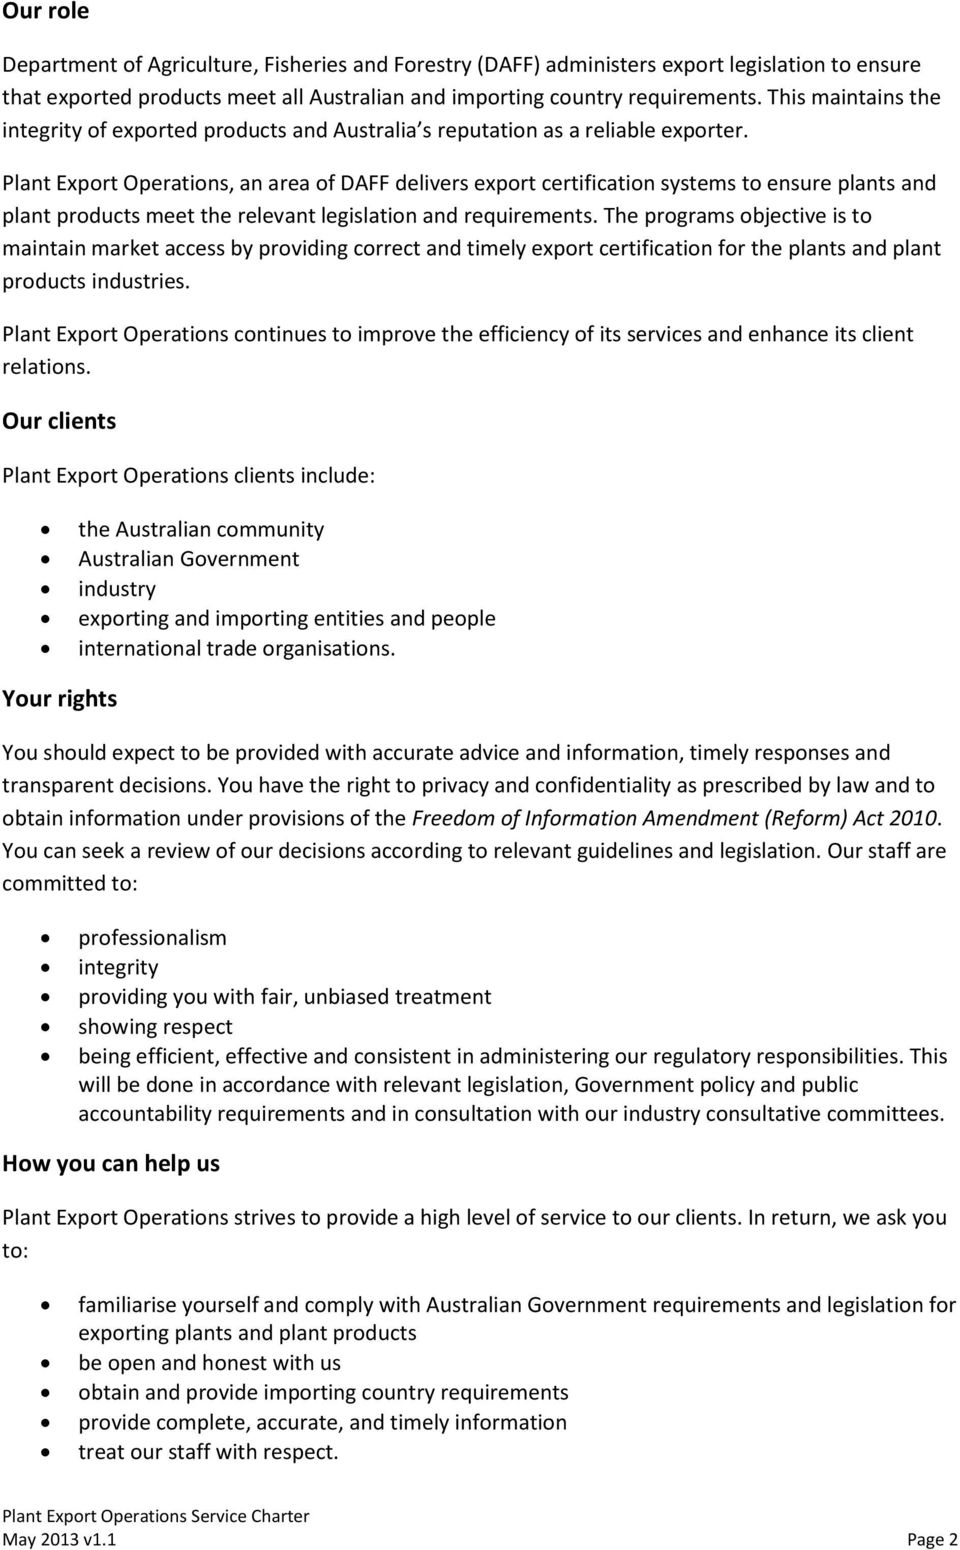 Plant Export Operations, an area of DAFF delivers export certification systems to ensure plants and plant products meet the relevant legislation and requirements.